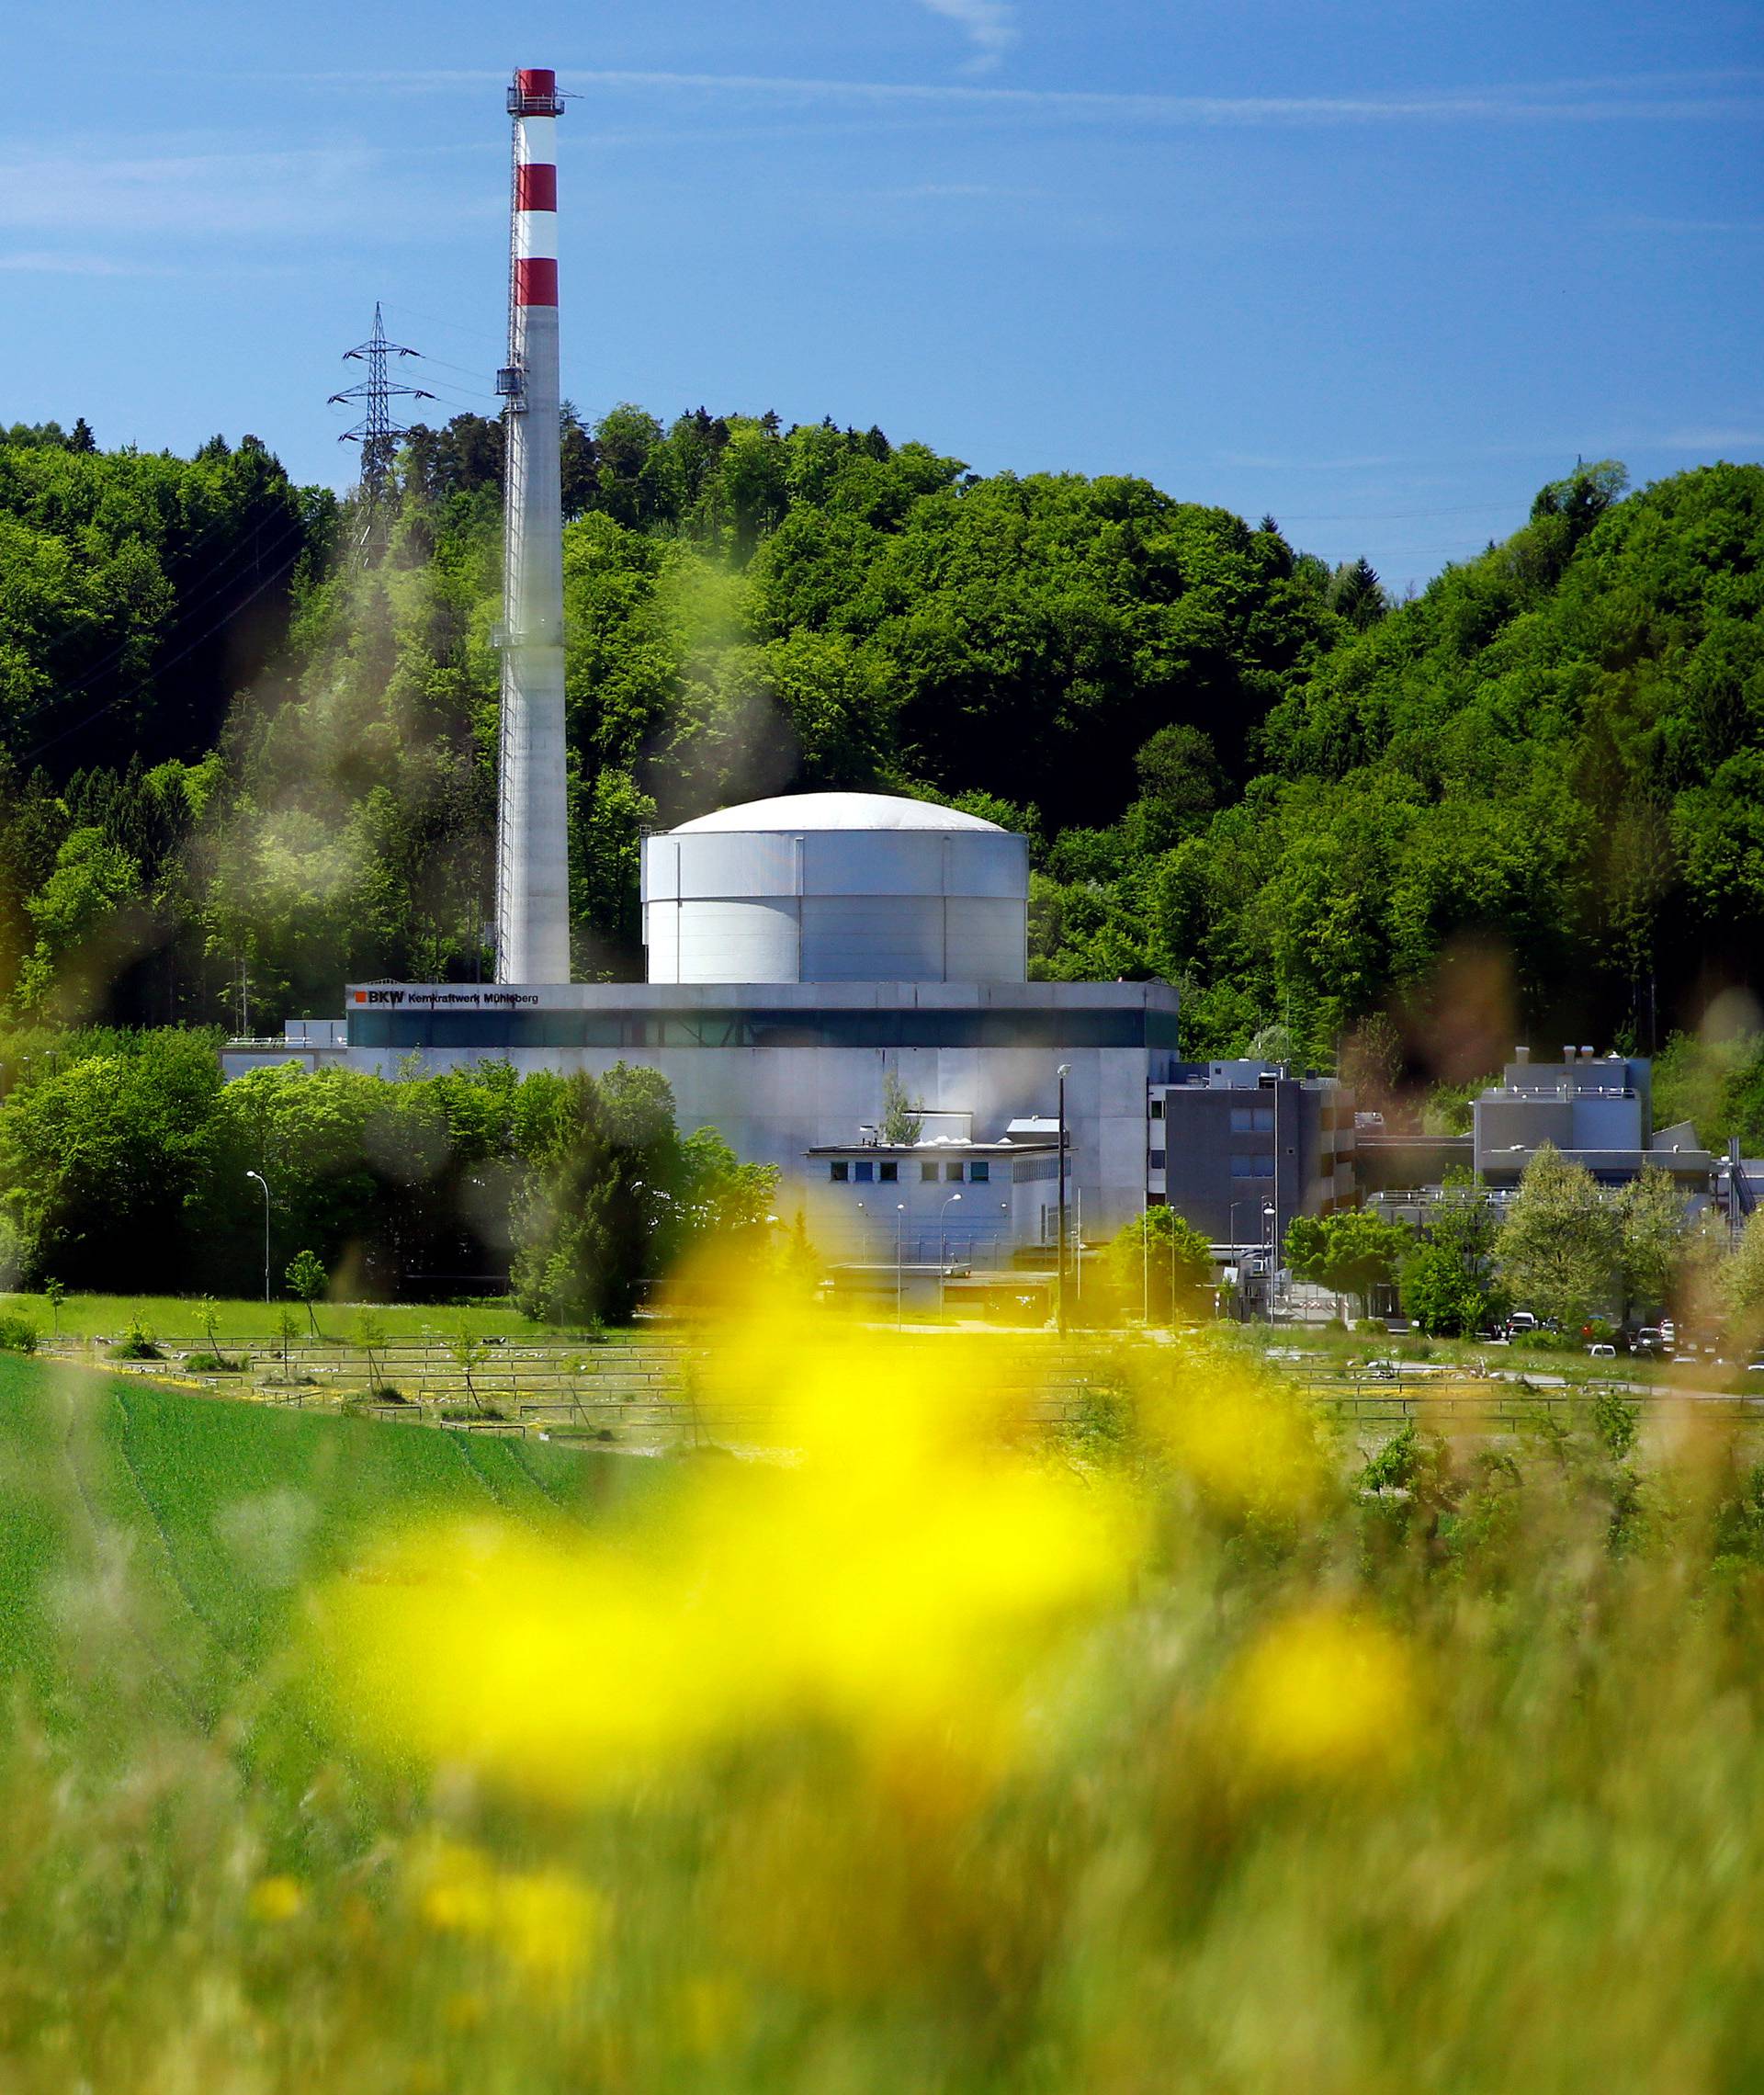 Swiss energy company BKW's Muehleberg nuclear power plant is pictured in Muehleberg